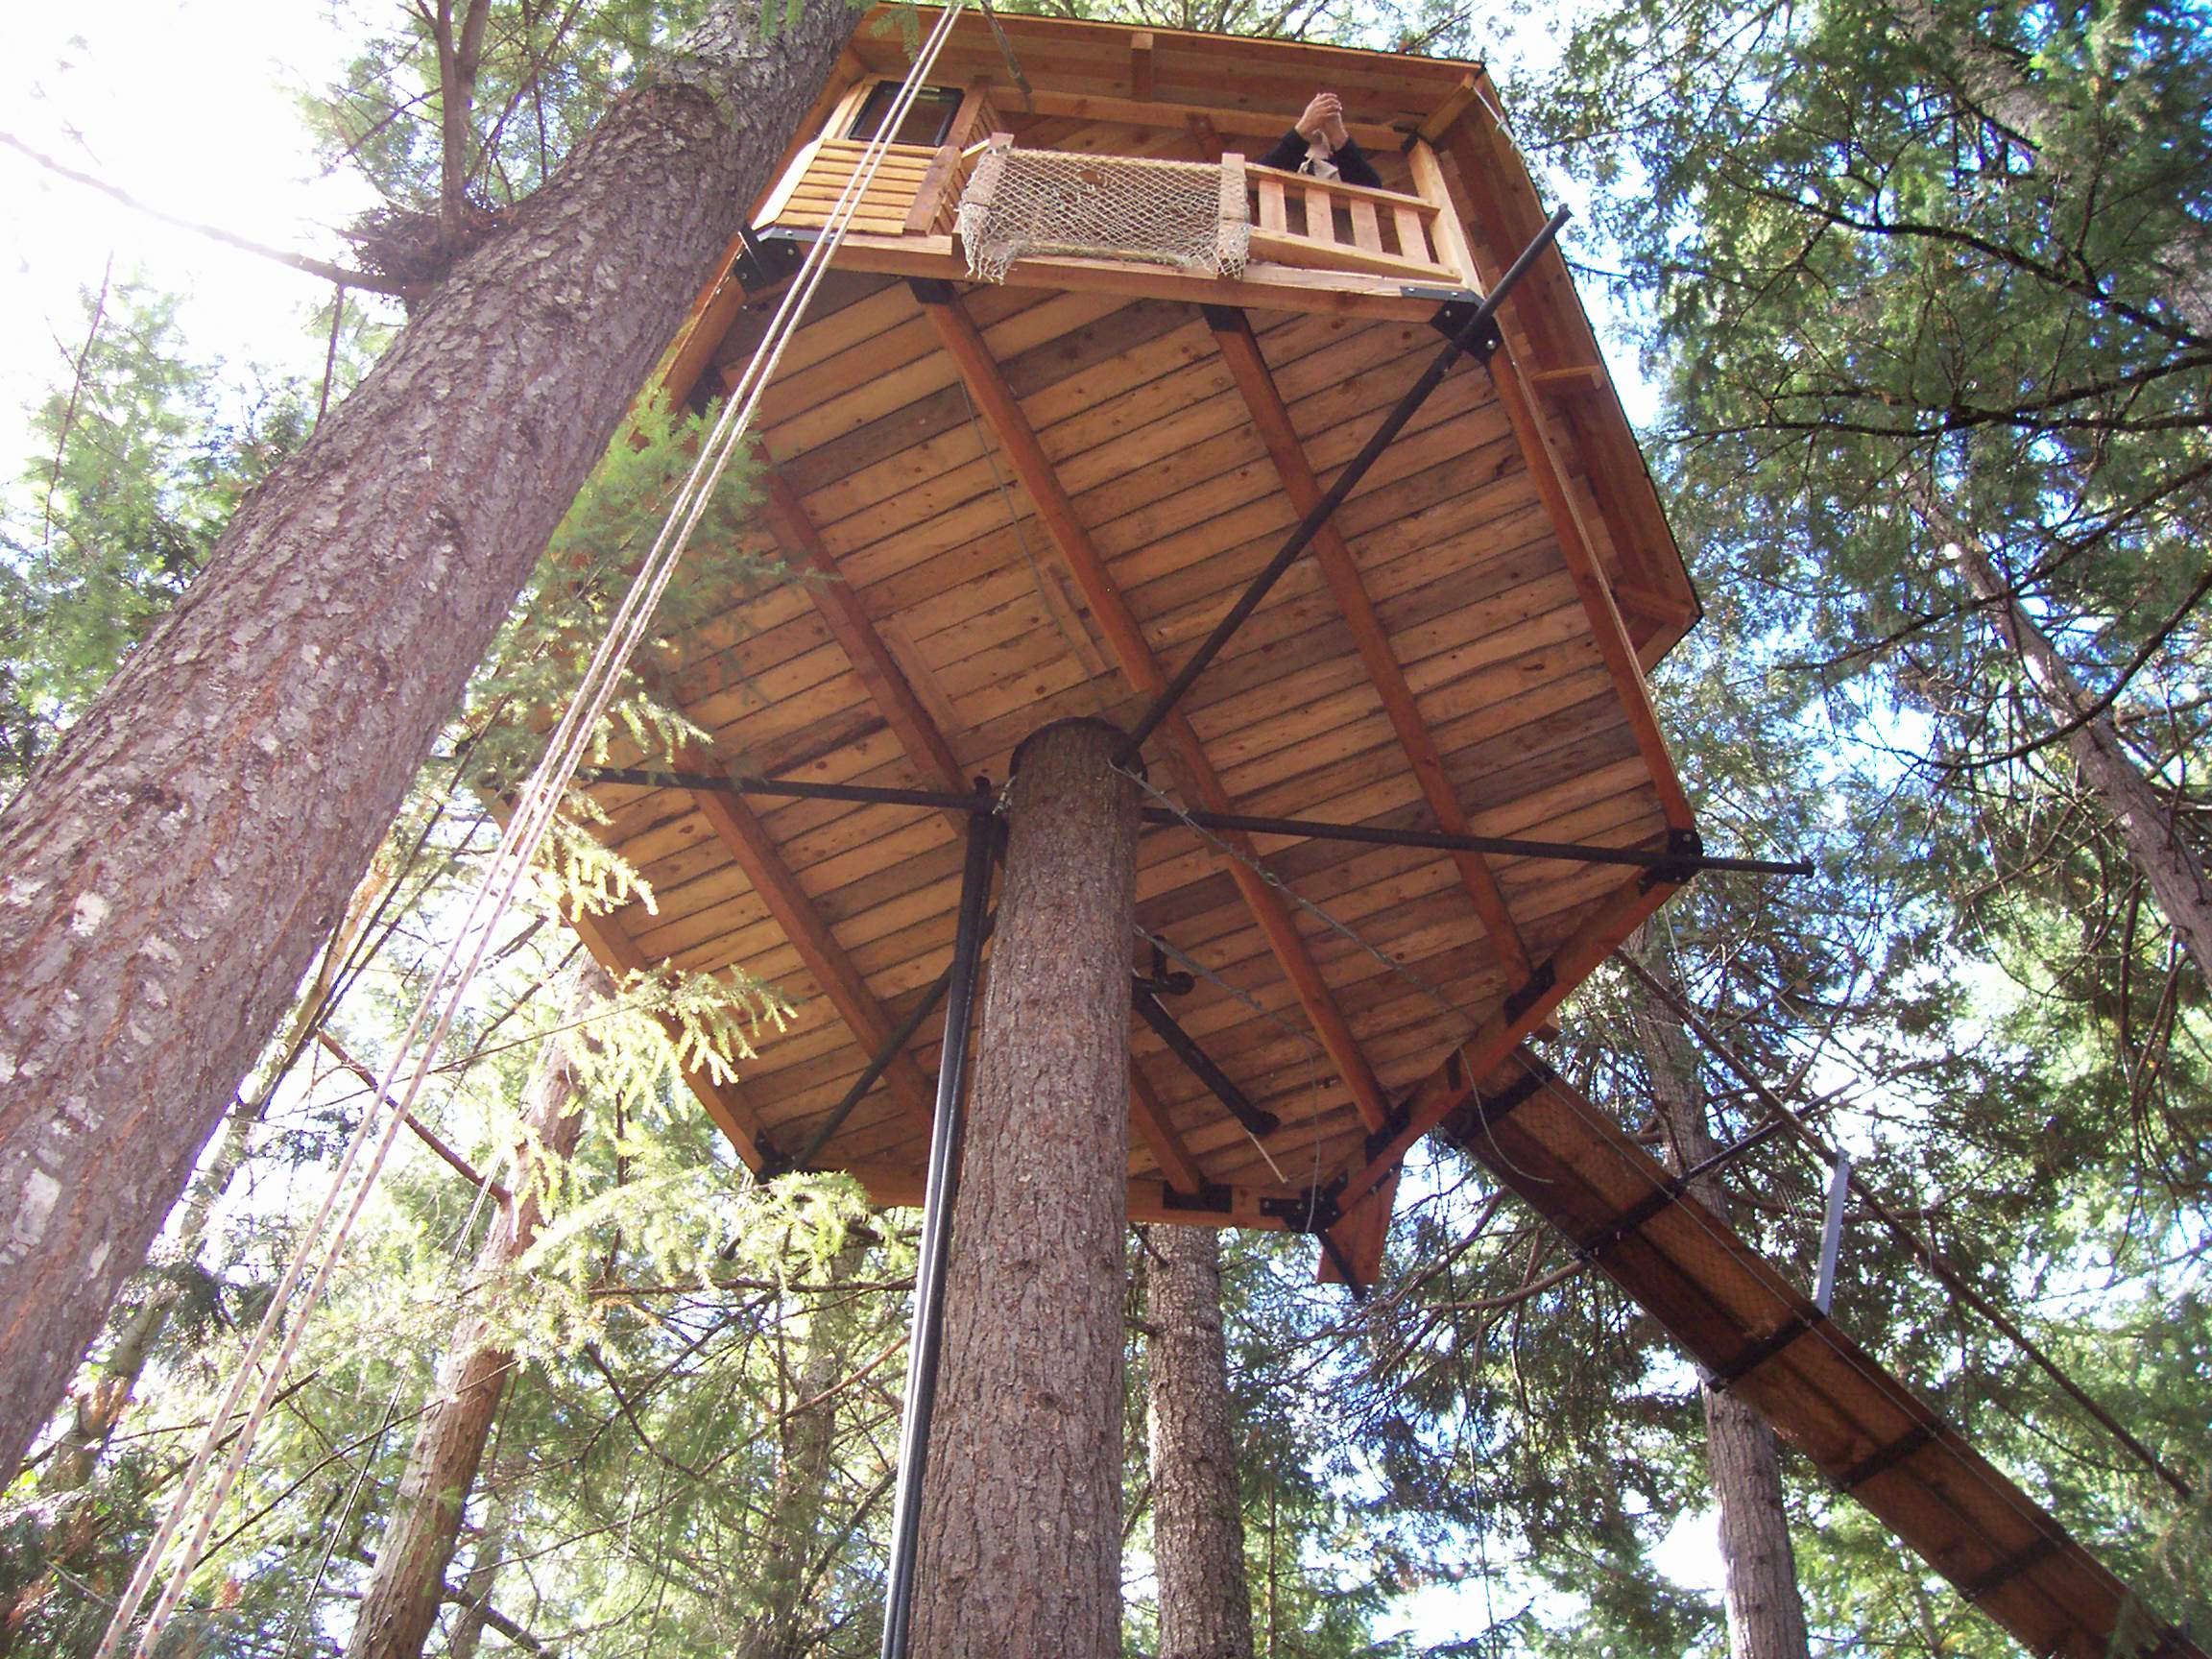 Building a tree house with pallets